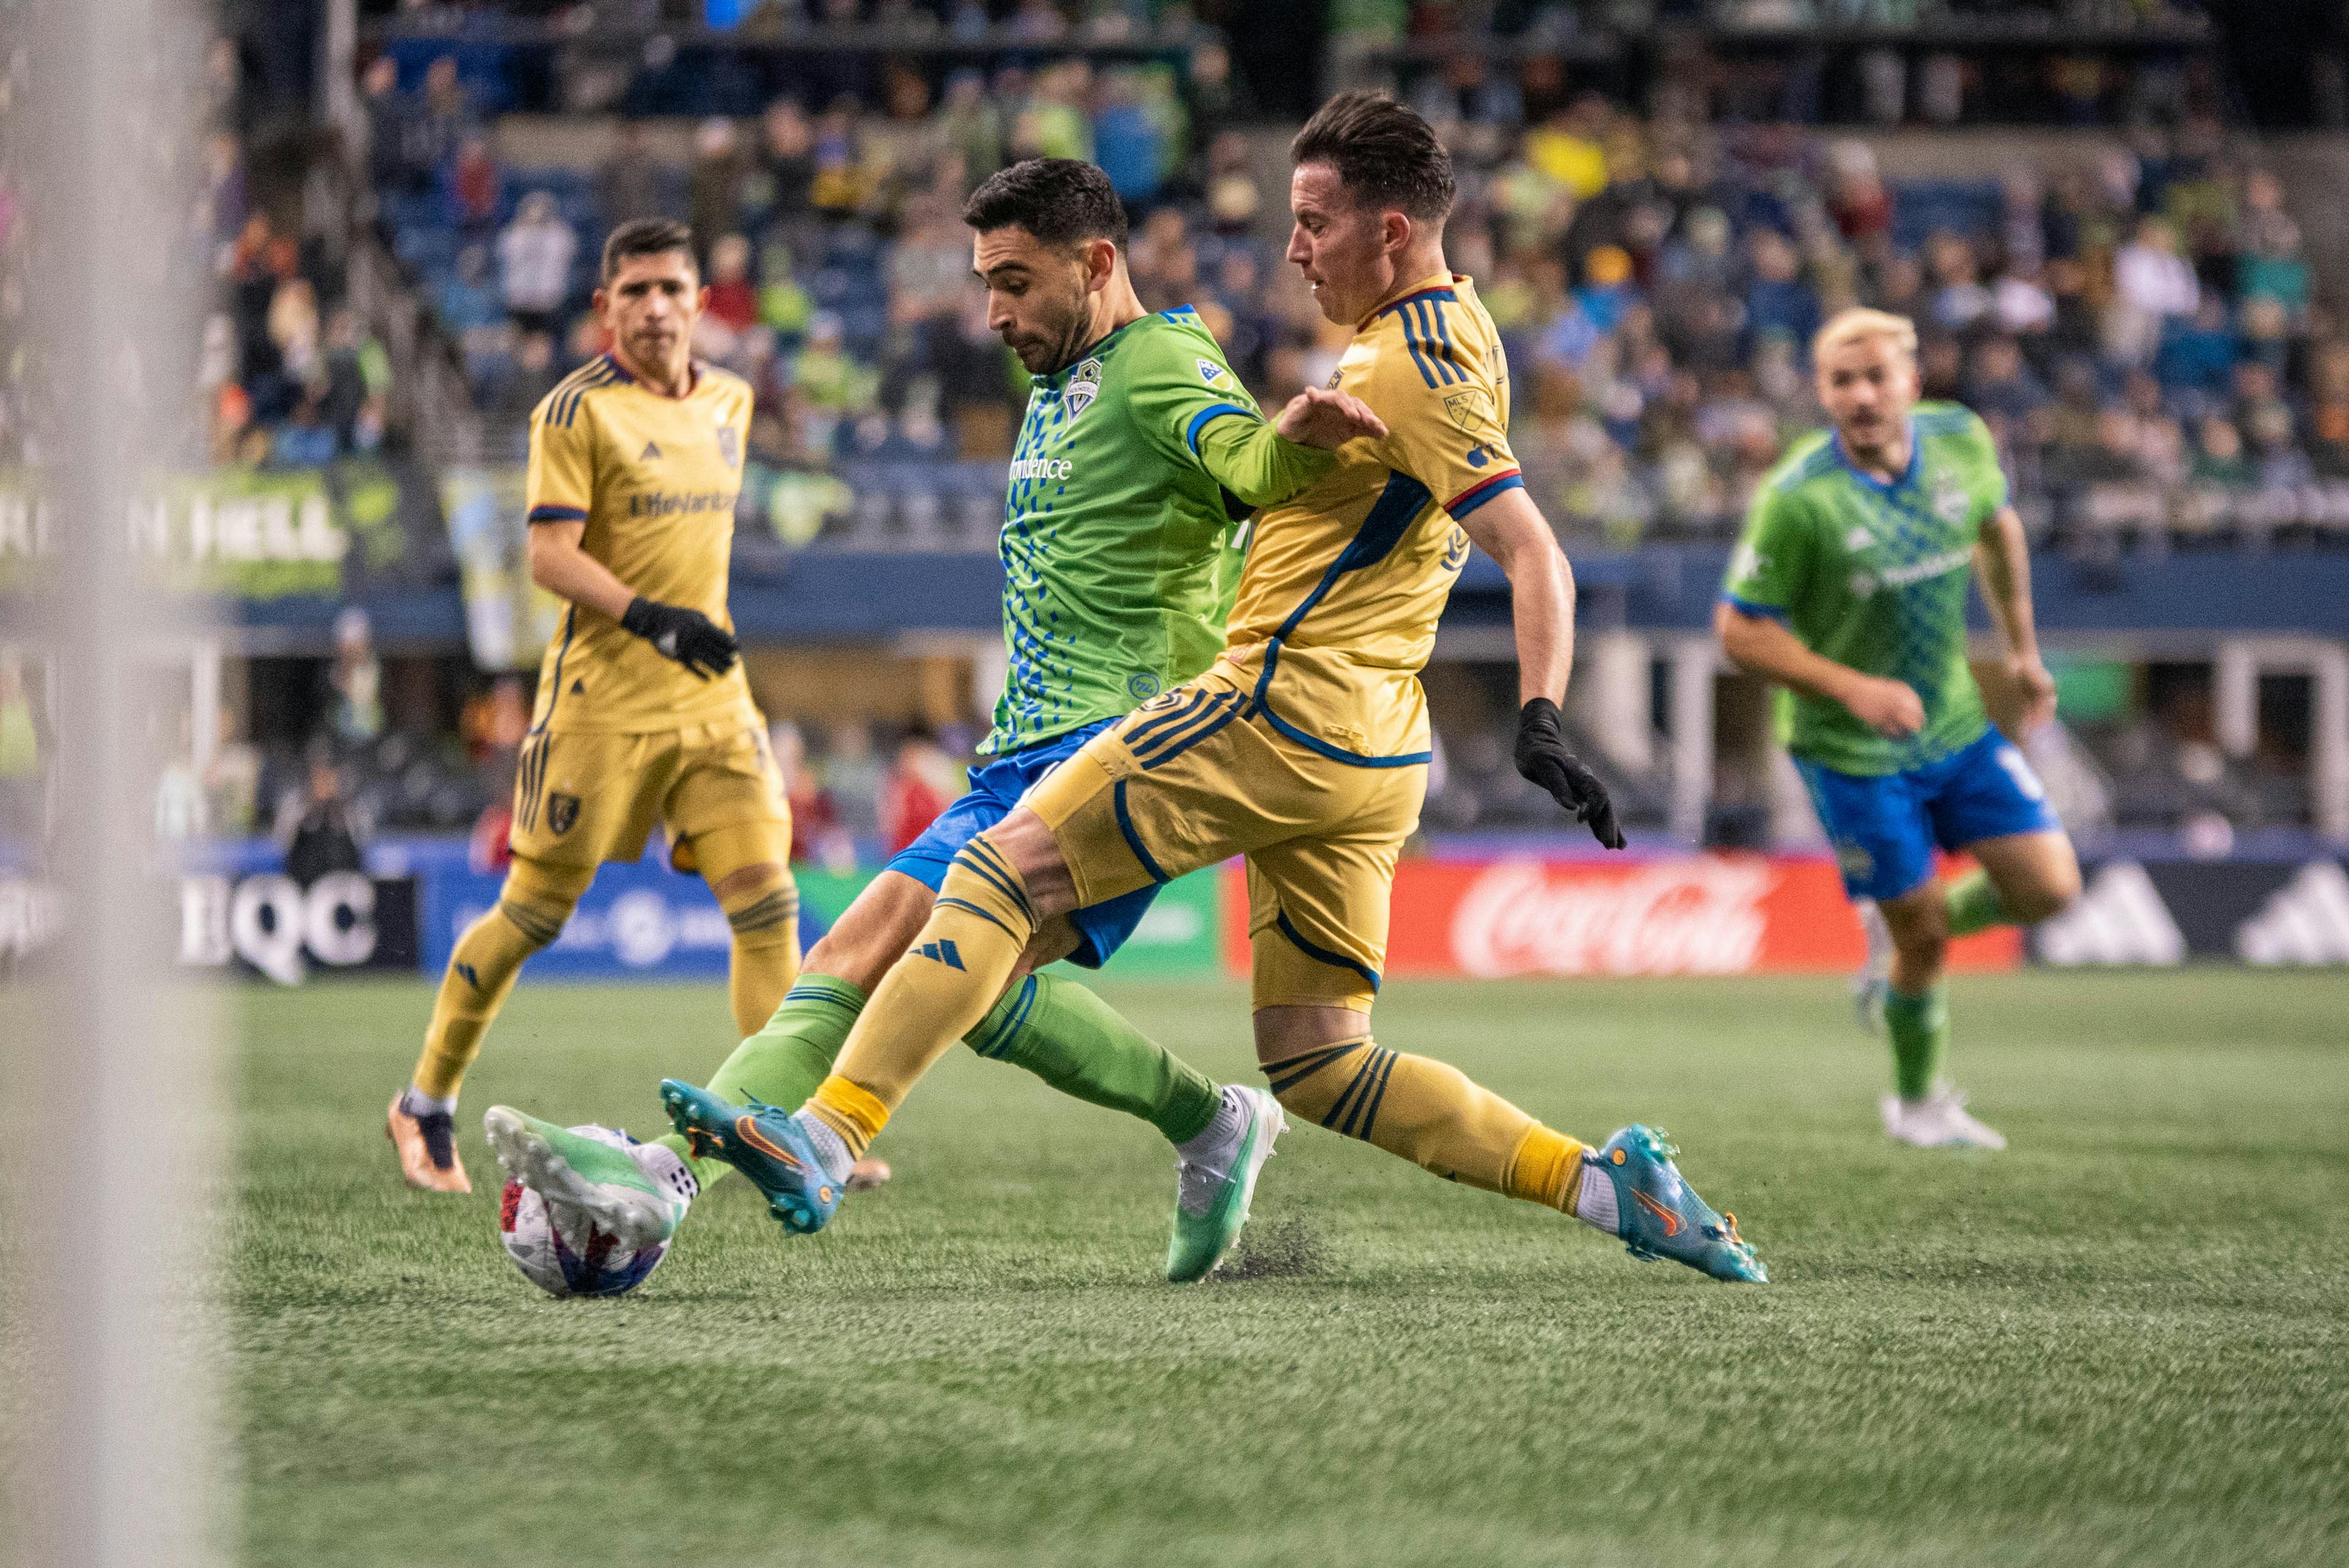 Bryan Oviedo challenges for the ball against Seattle Sounders.